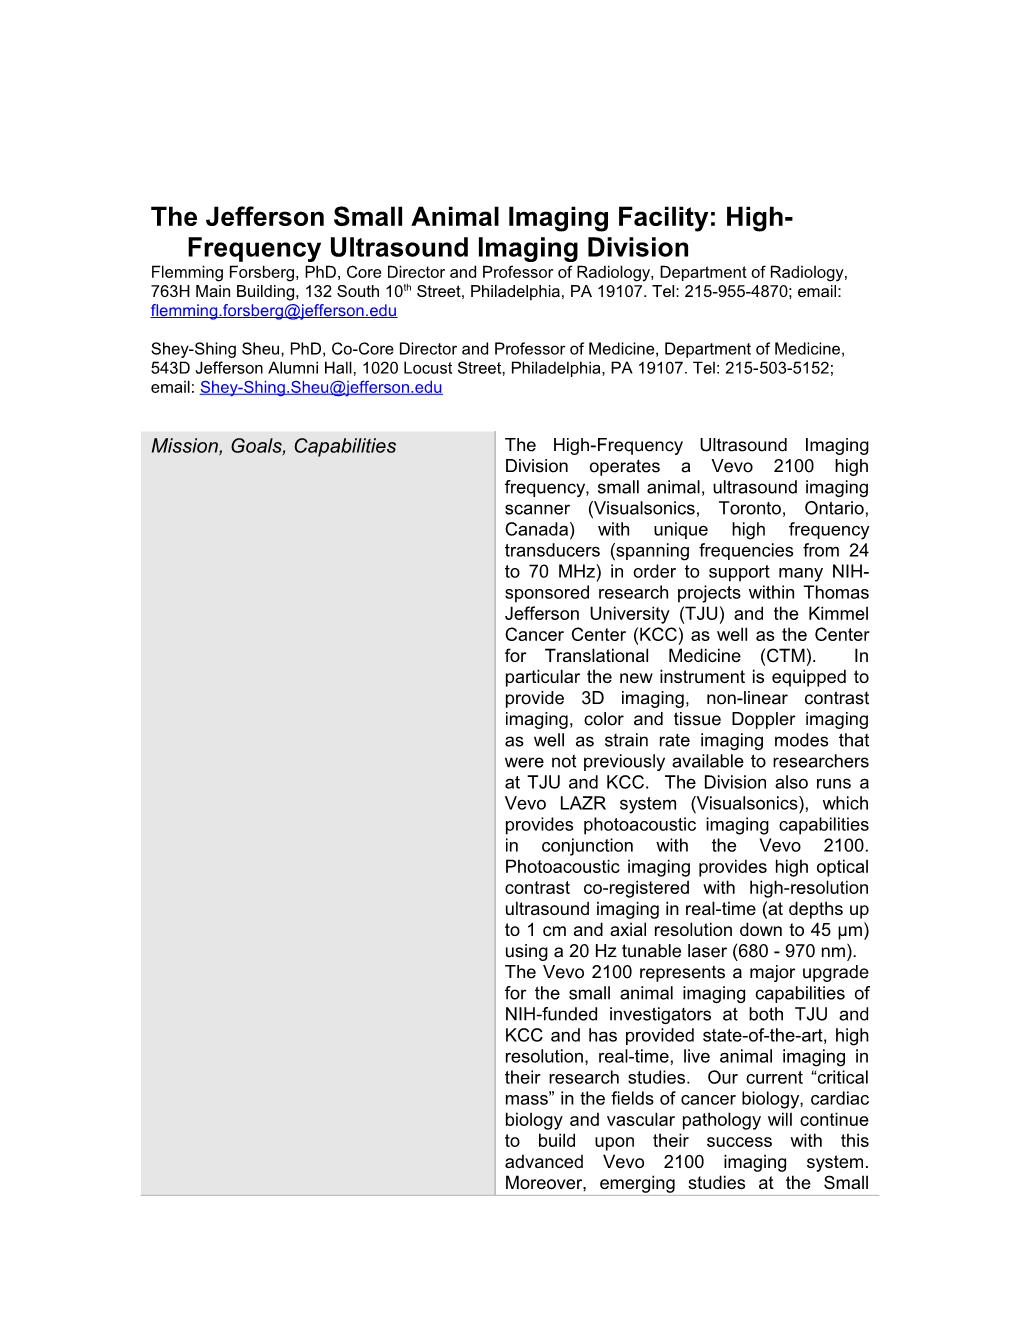 The Jefferson Small Animal Imaging Facility: High-Frequency Ultrasound Imaging Division